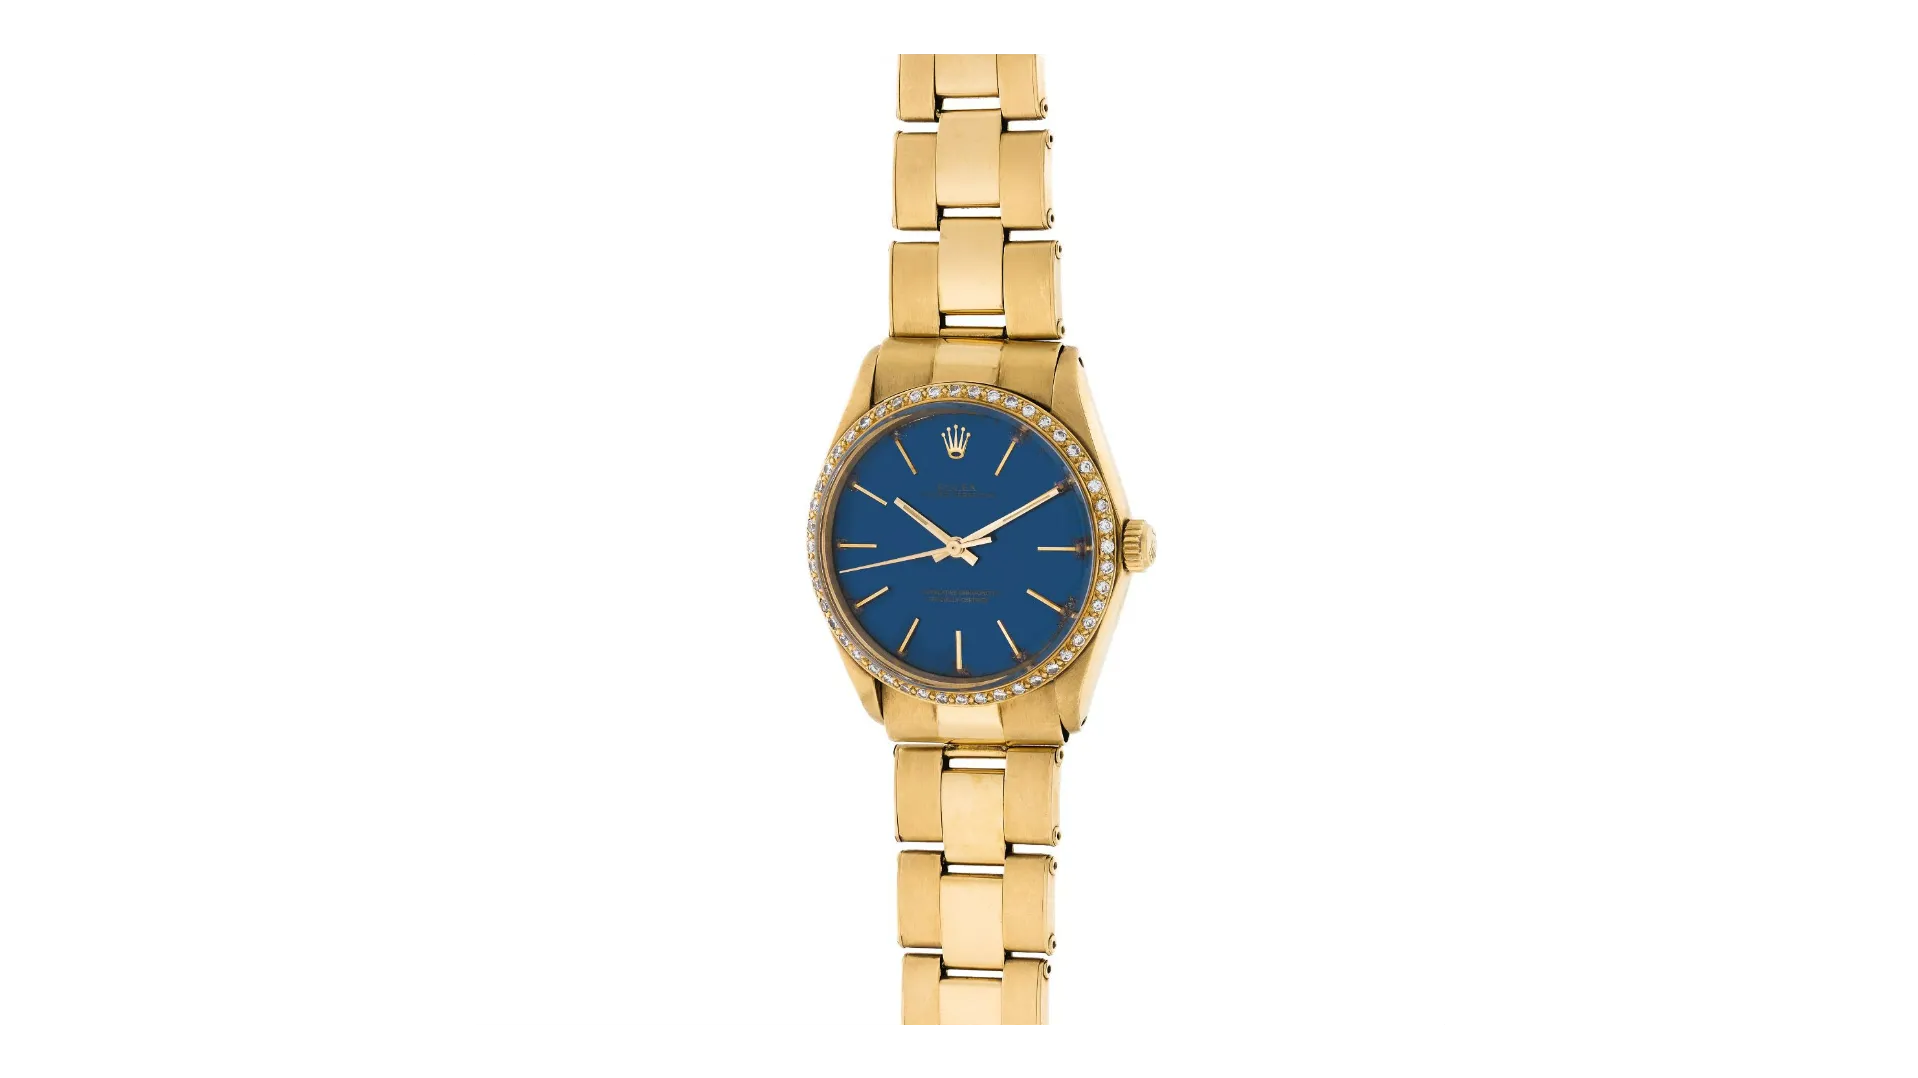 Rolex Oyster Perpetual 1002 34mm Yellow gold and diamond-set Blue